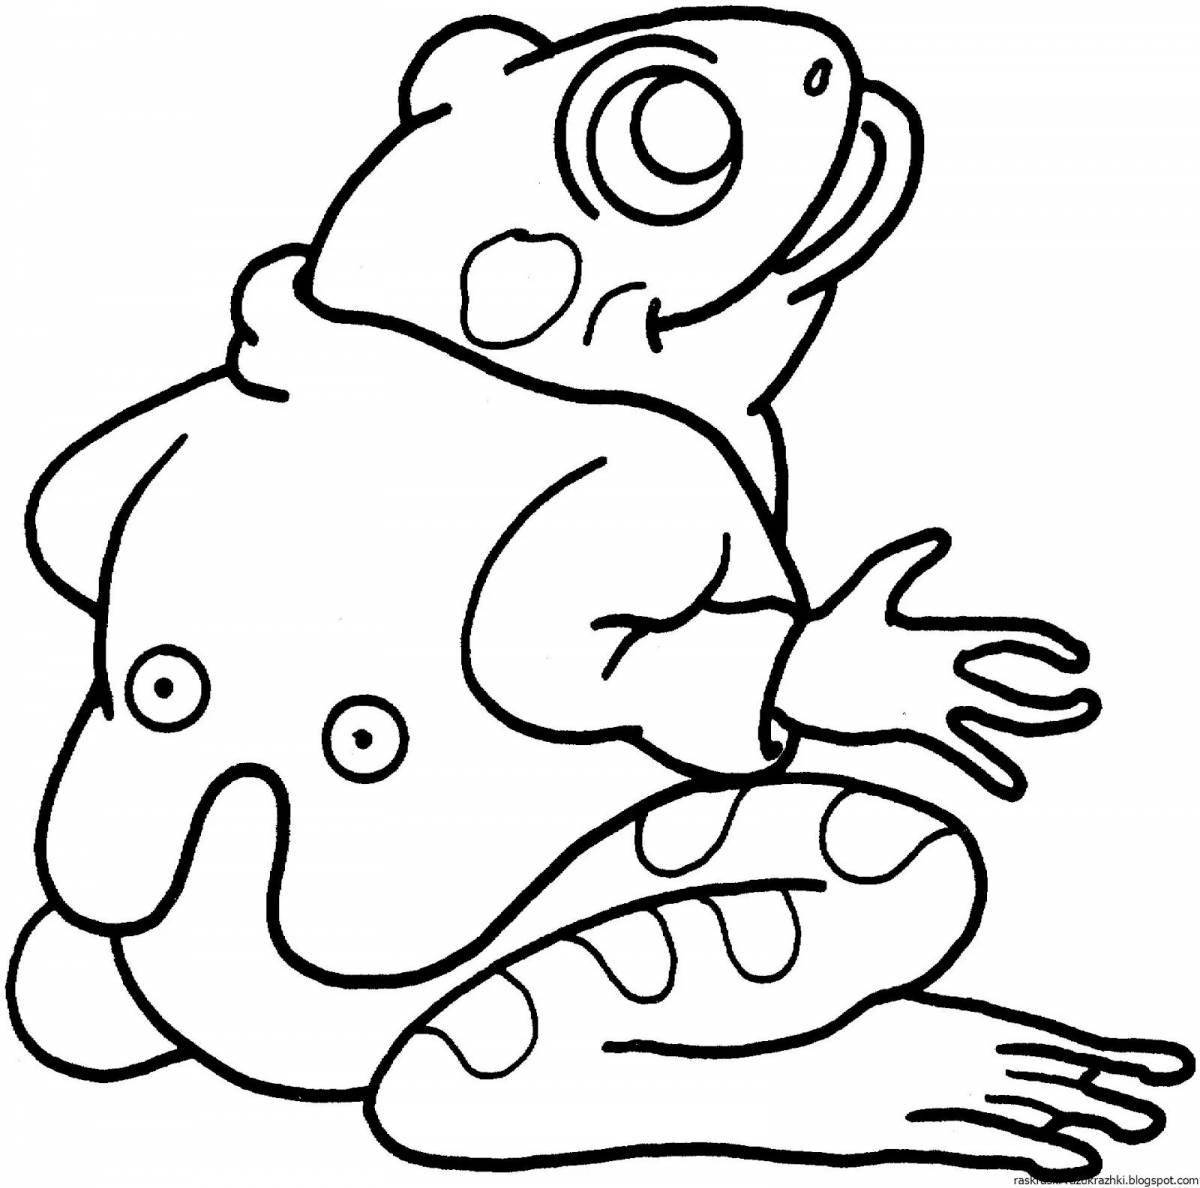 Magic frog coloring book for kids